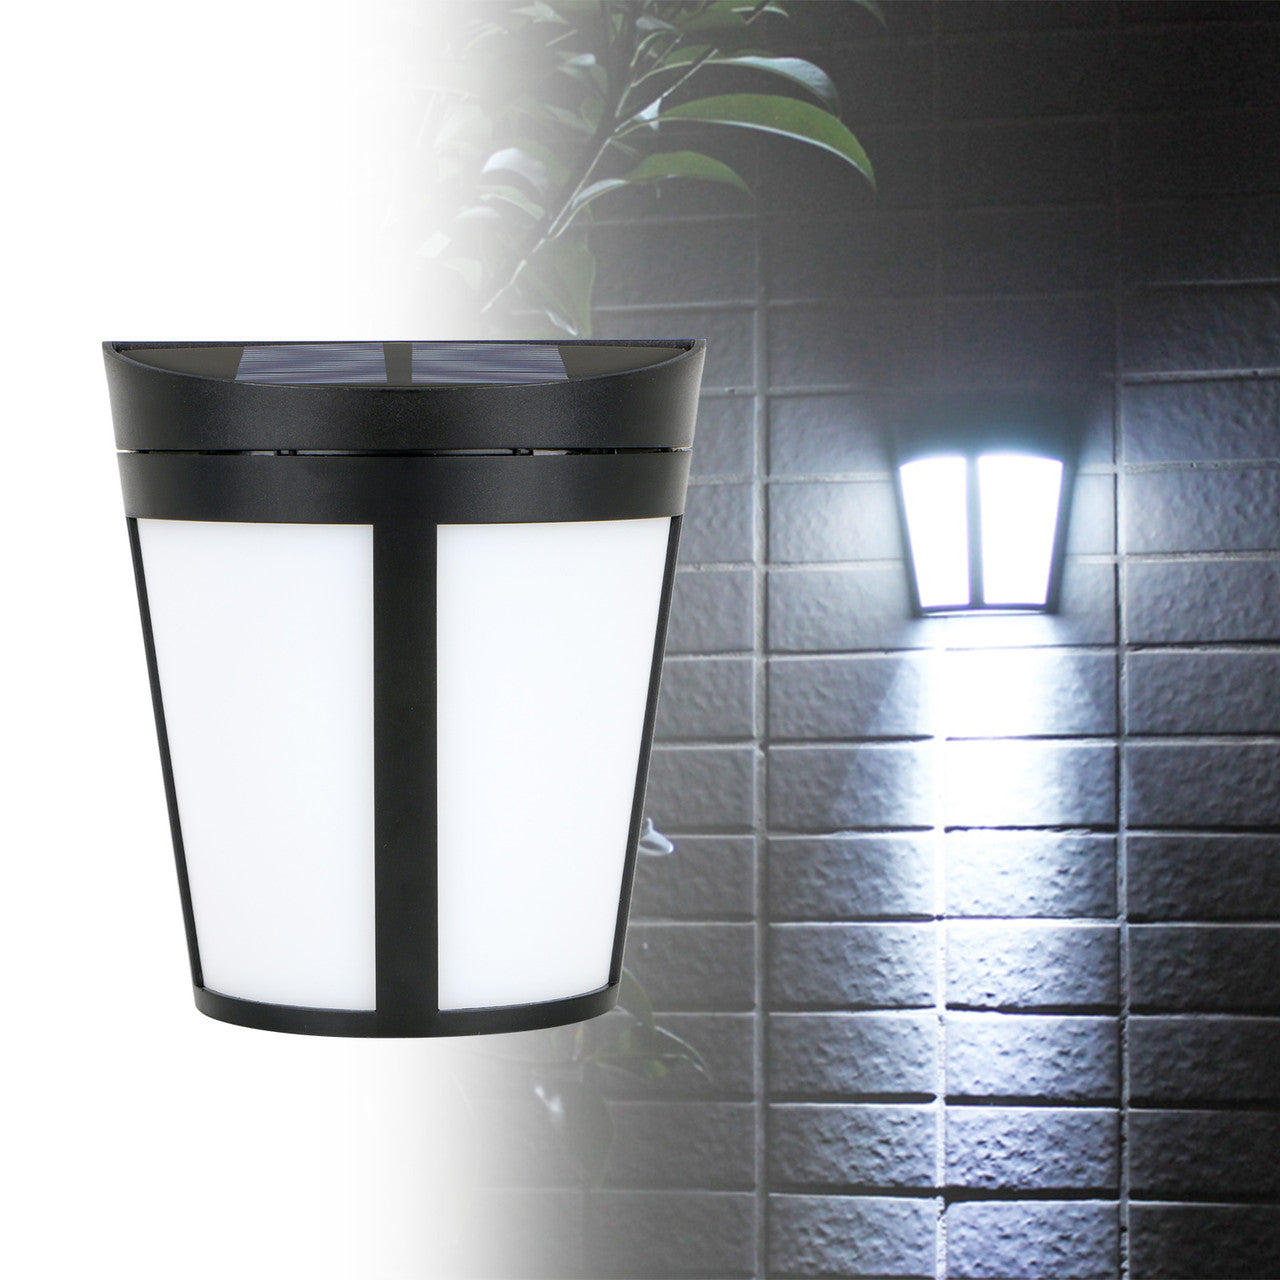 Wall Mounted Solar Lights, Solar Night Security Lamps for Front Door, Outside Wall, Back Yard, Garage, Garden, Fence, Driveway